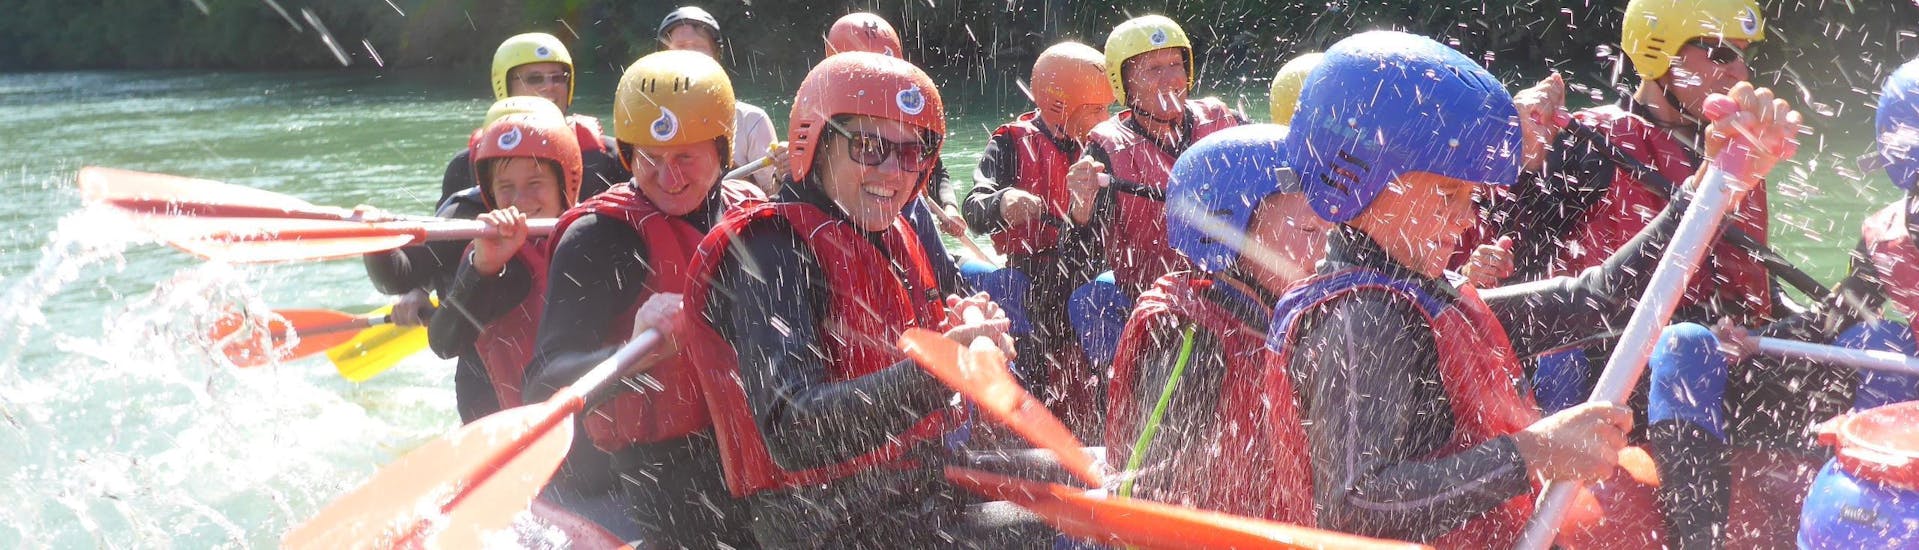 A group of participants on the raftin boat on the Iller River with Spirits of Nature Allgäu.